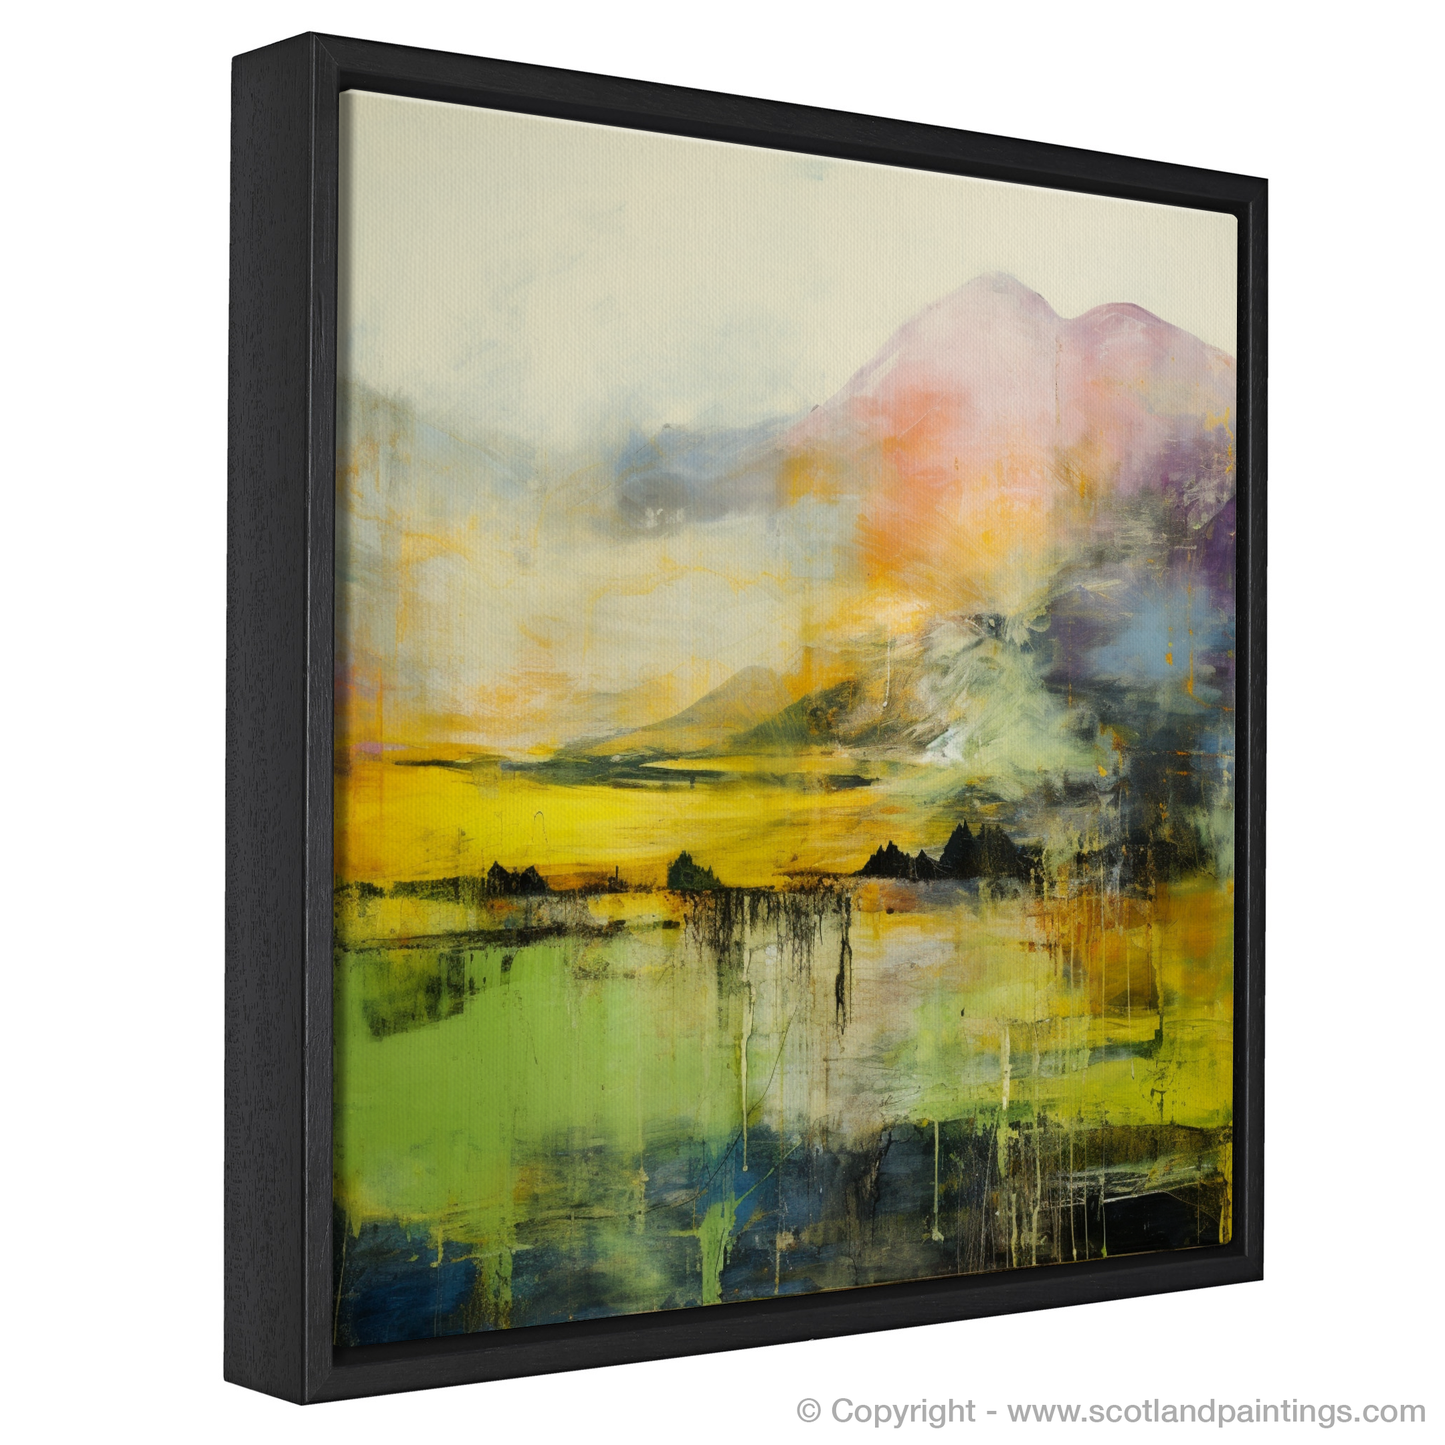 Painting and Art Print of Glen Orchy, Argyll and Bute entitled "Glen Orchy's Wild Rhapsody: An Abstract Expressionist Ode to the Scottish Highlands".